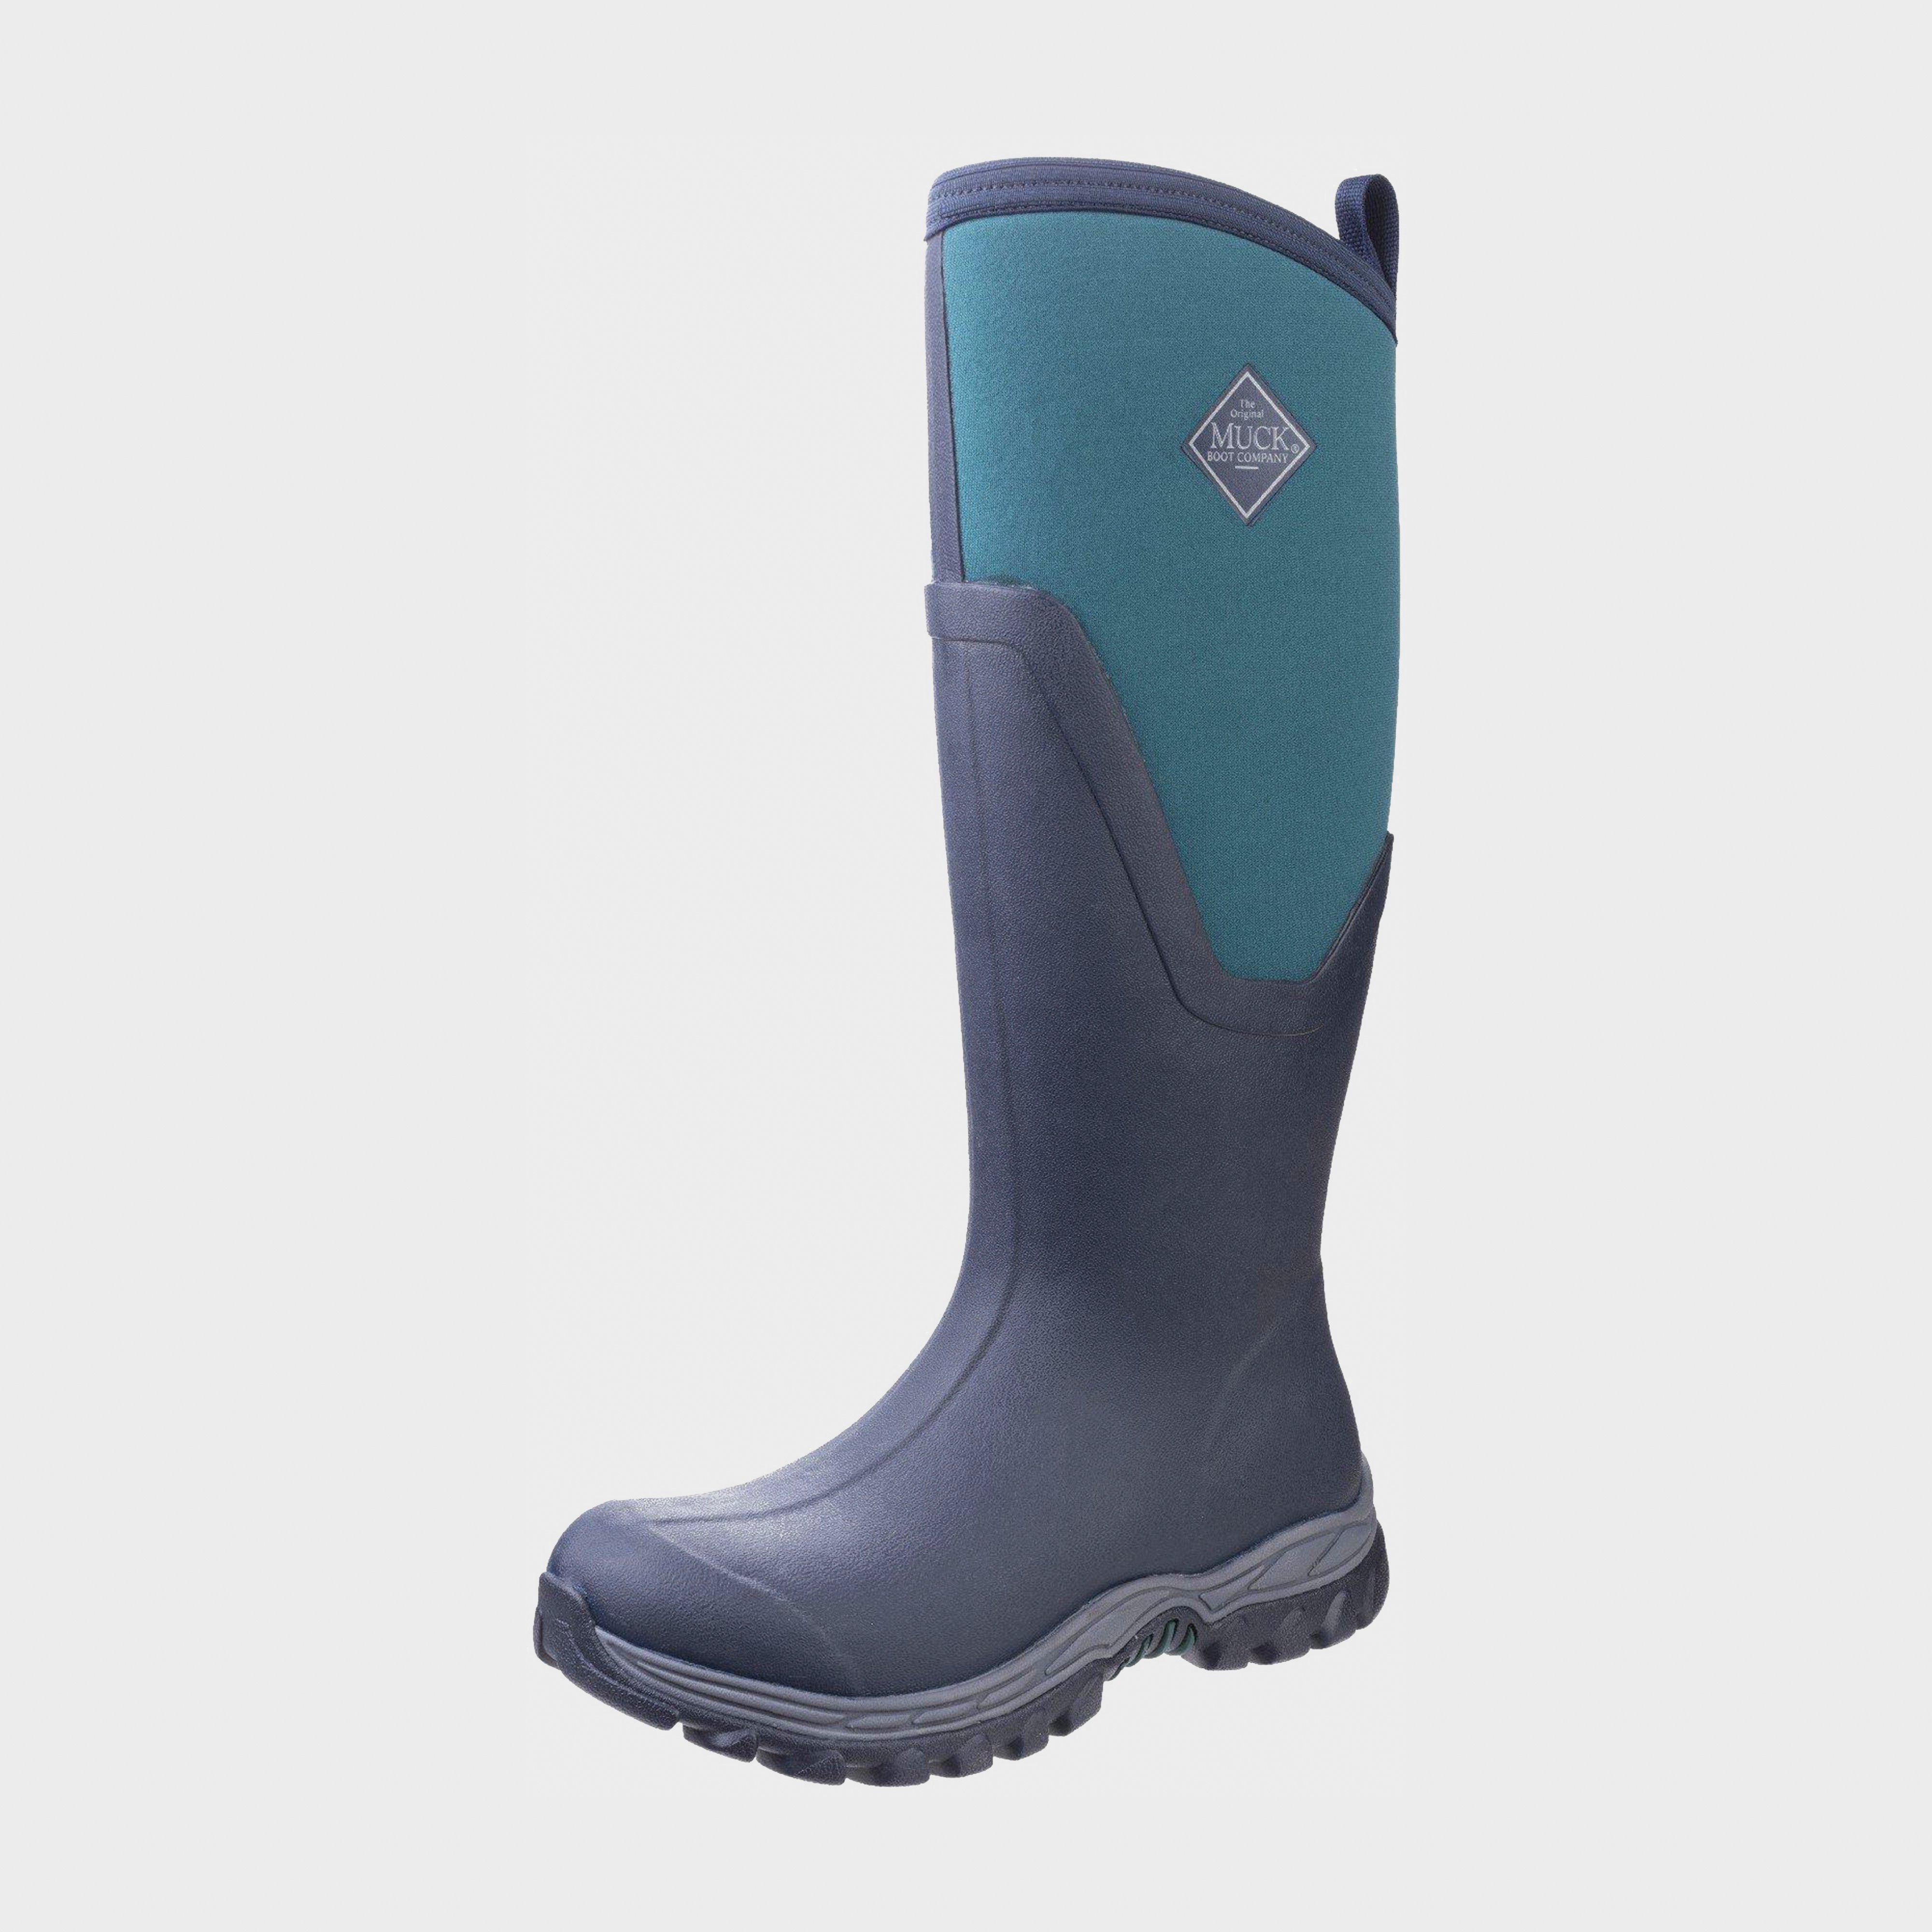 muck boots stockists near me